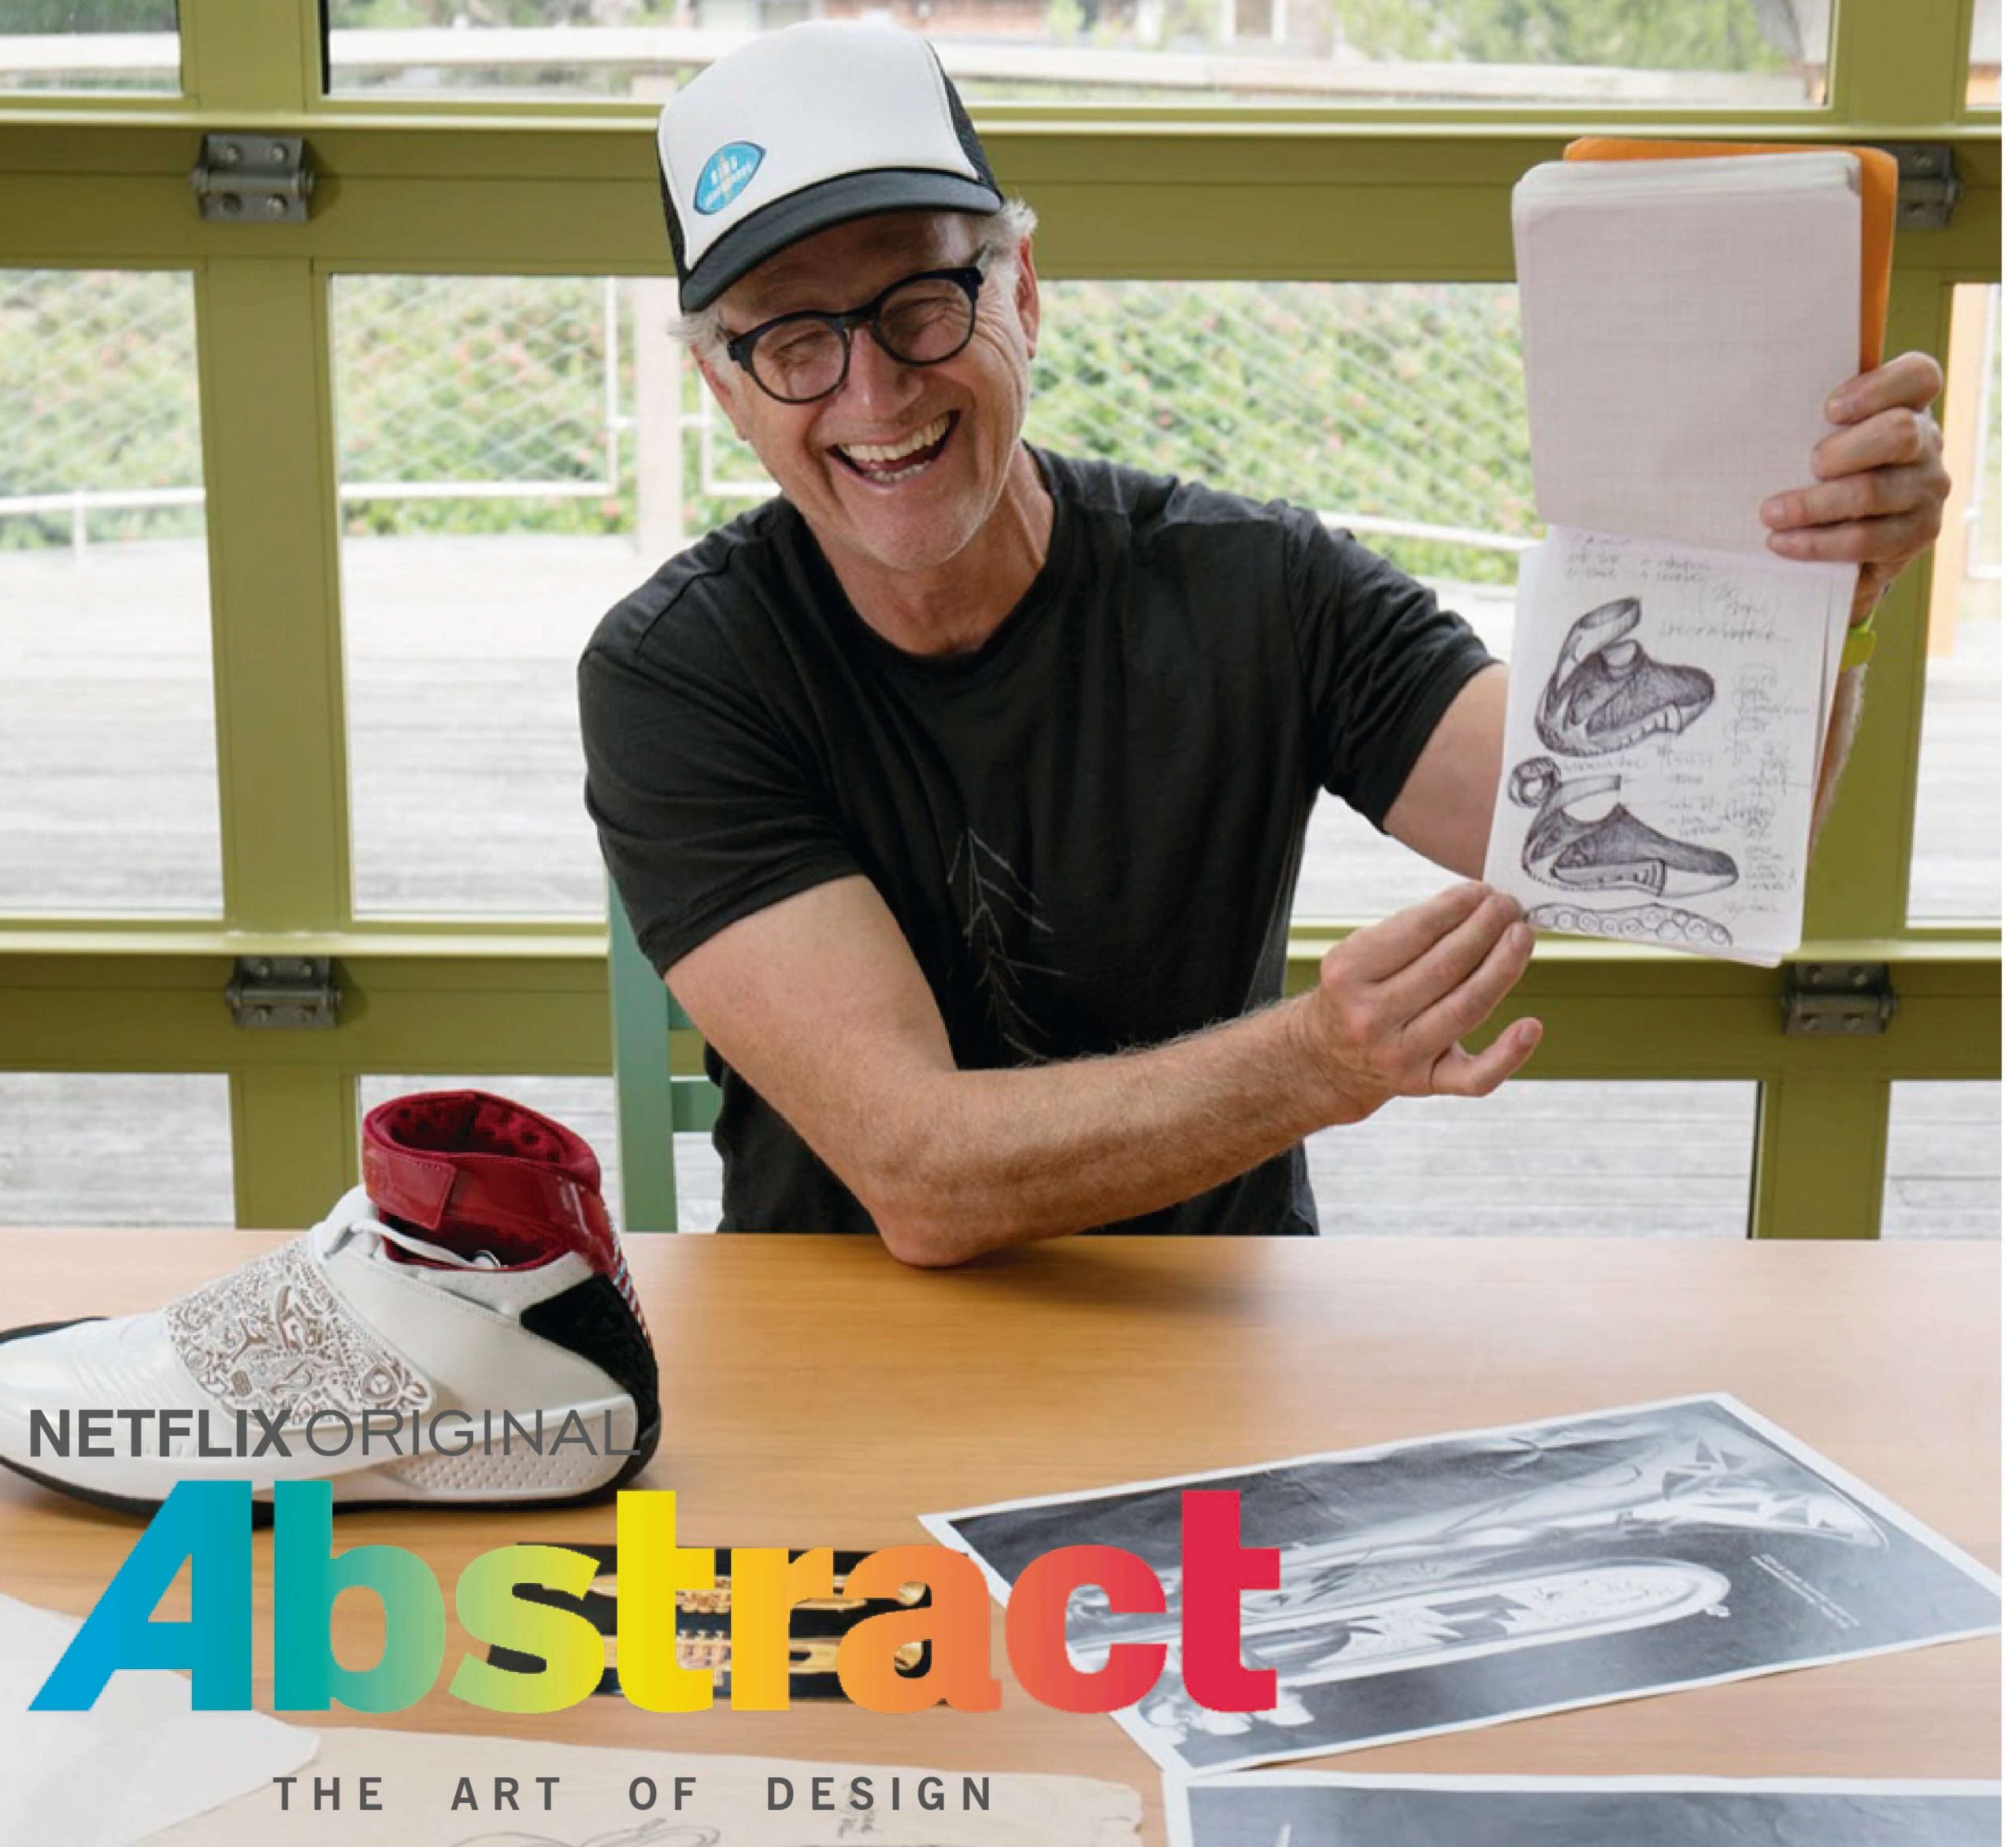 Abstract The Art of Design Tinker Hatfield Nike